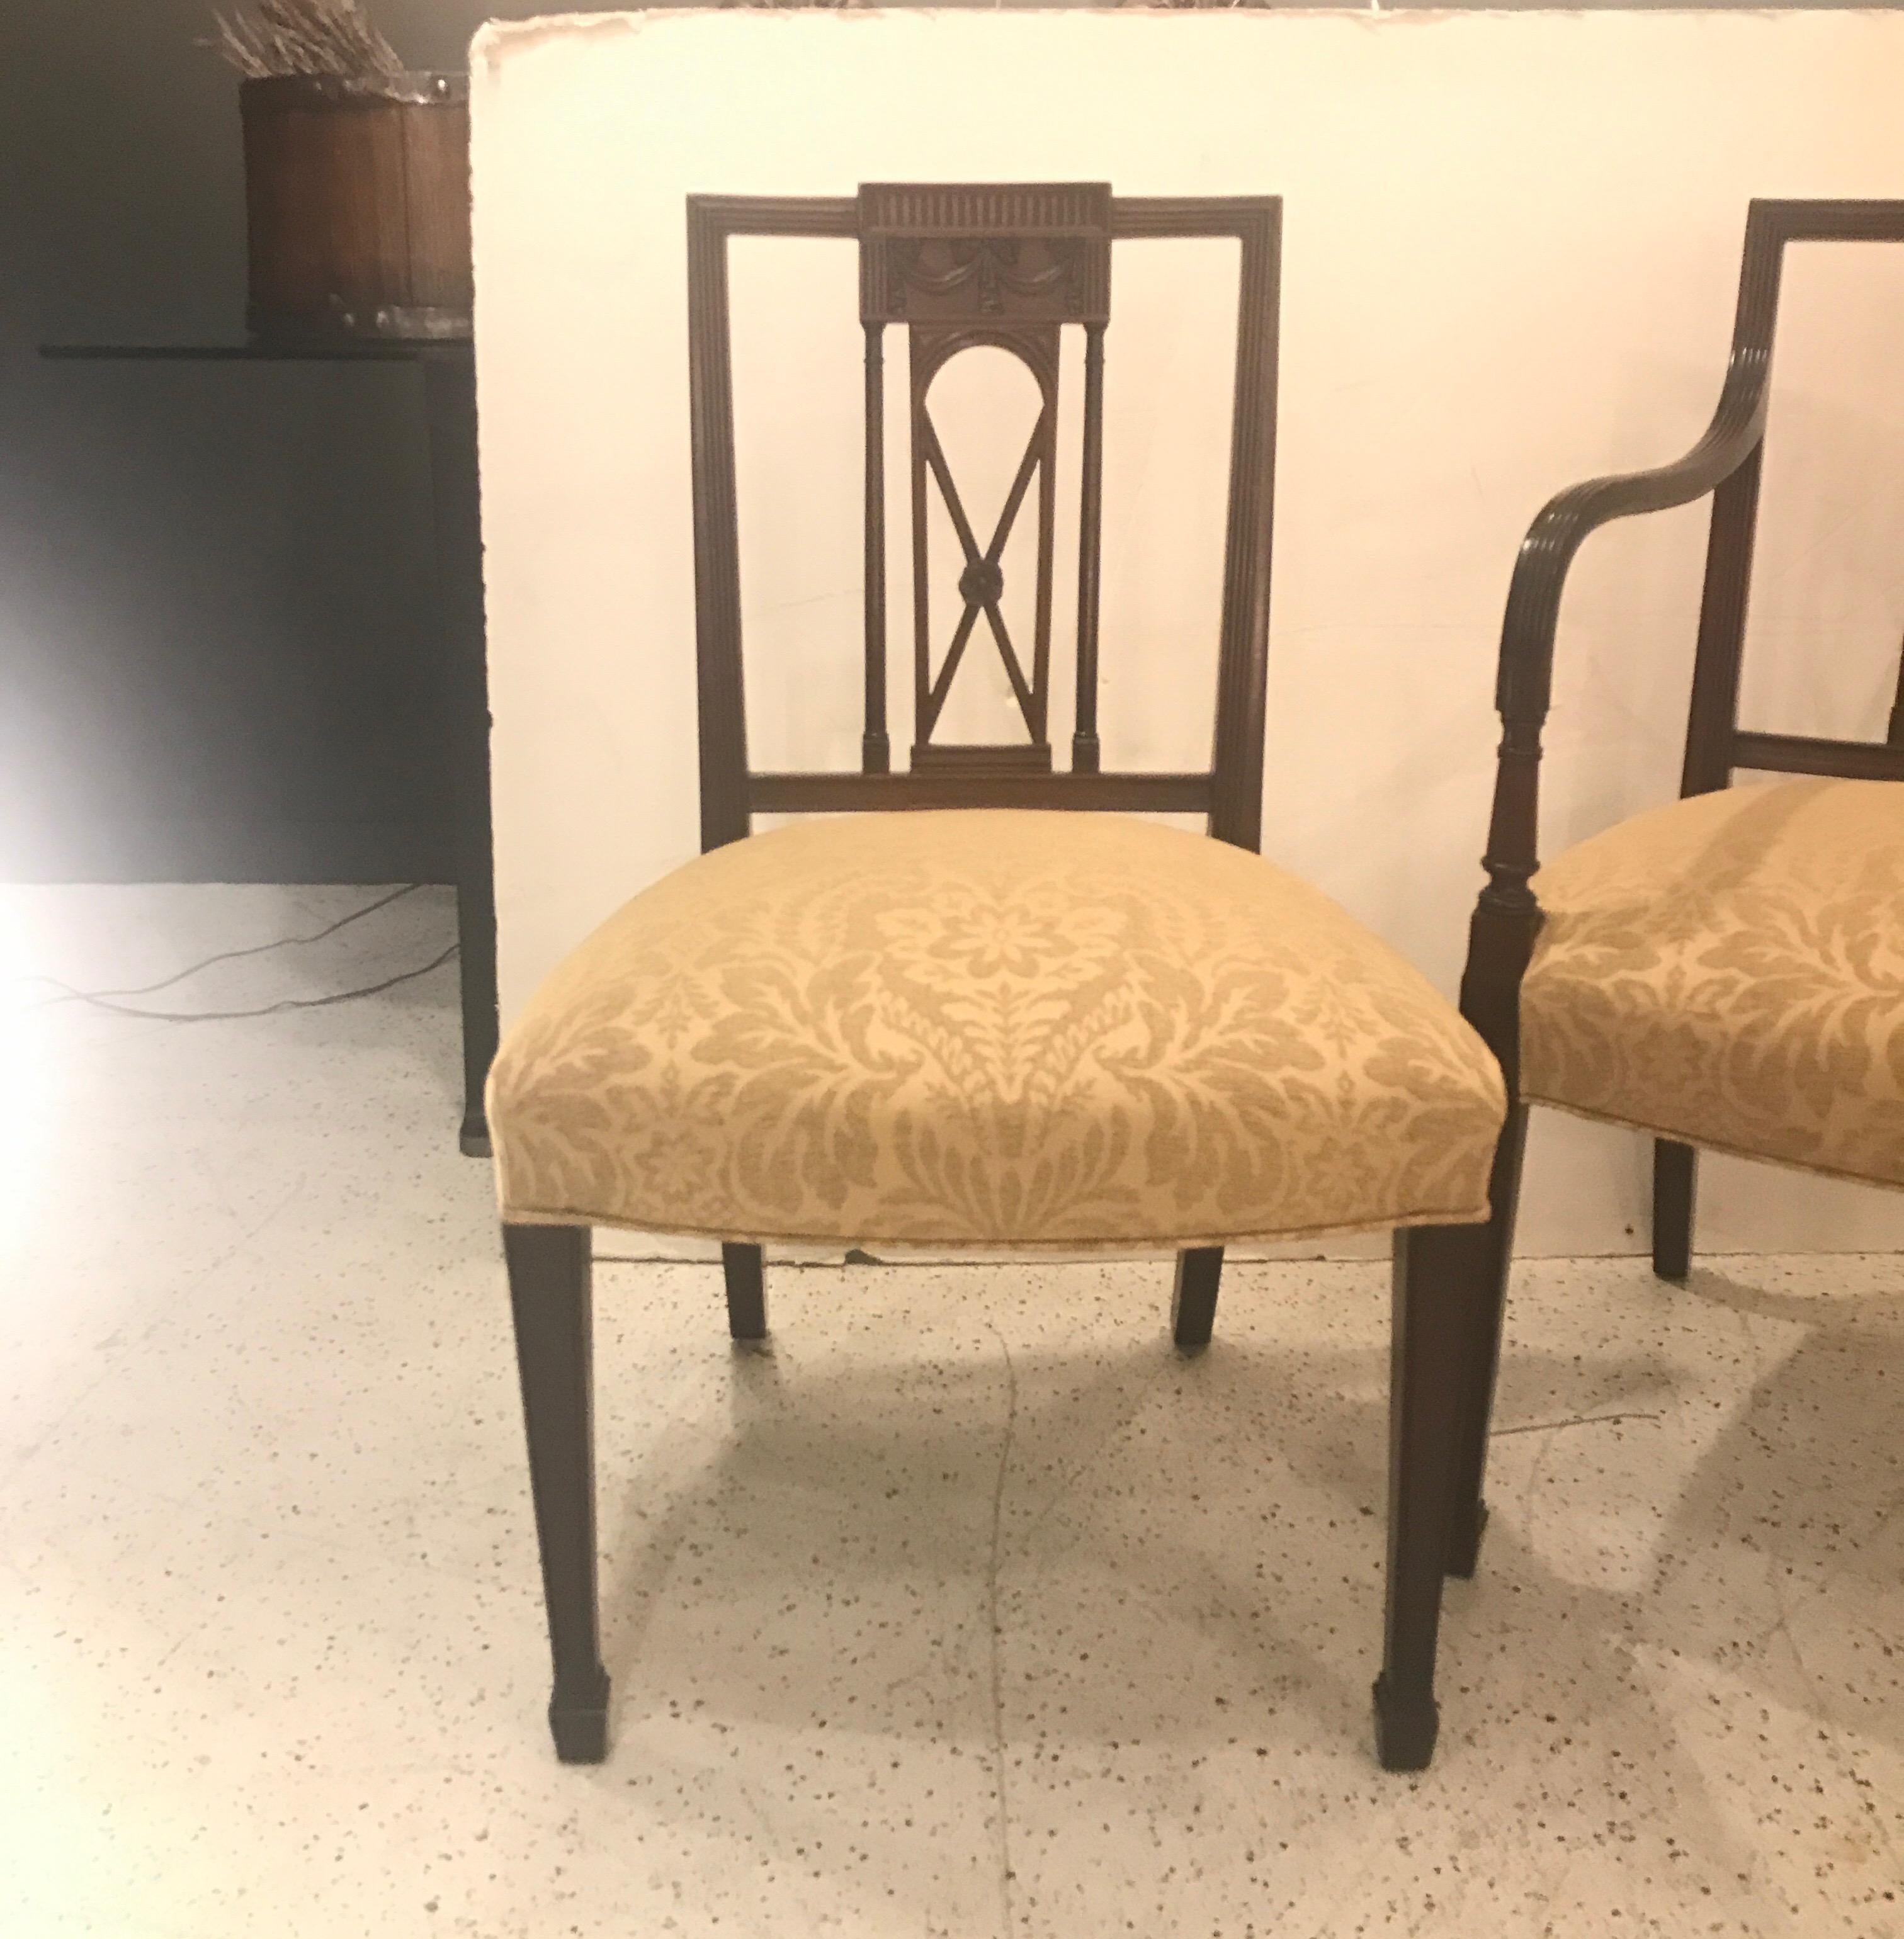 Hand-carved mahogany in a Hepplewhite style in mahogany with new cotton linen damask upholstery. Two armchairs and four side chairs with smaller square backs and hand-carved details. The arm chairs with reeded simple arms. The square legs with